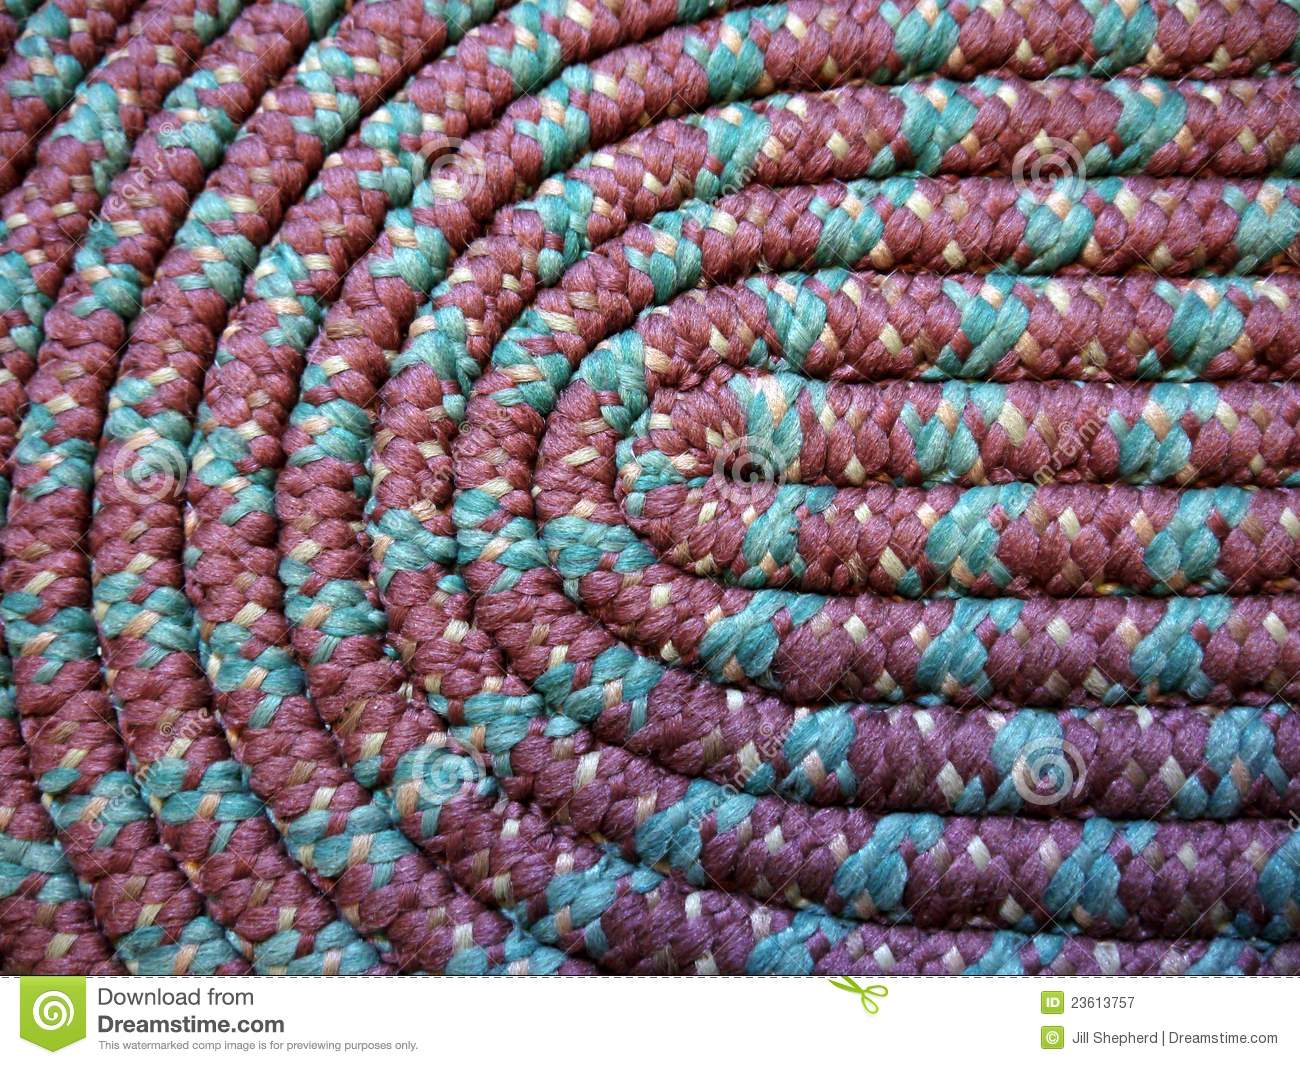 Home  Handmade Coiled Rag Rug Detail Royalty Free Stock Photography    